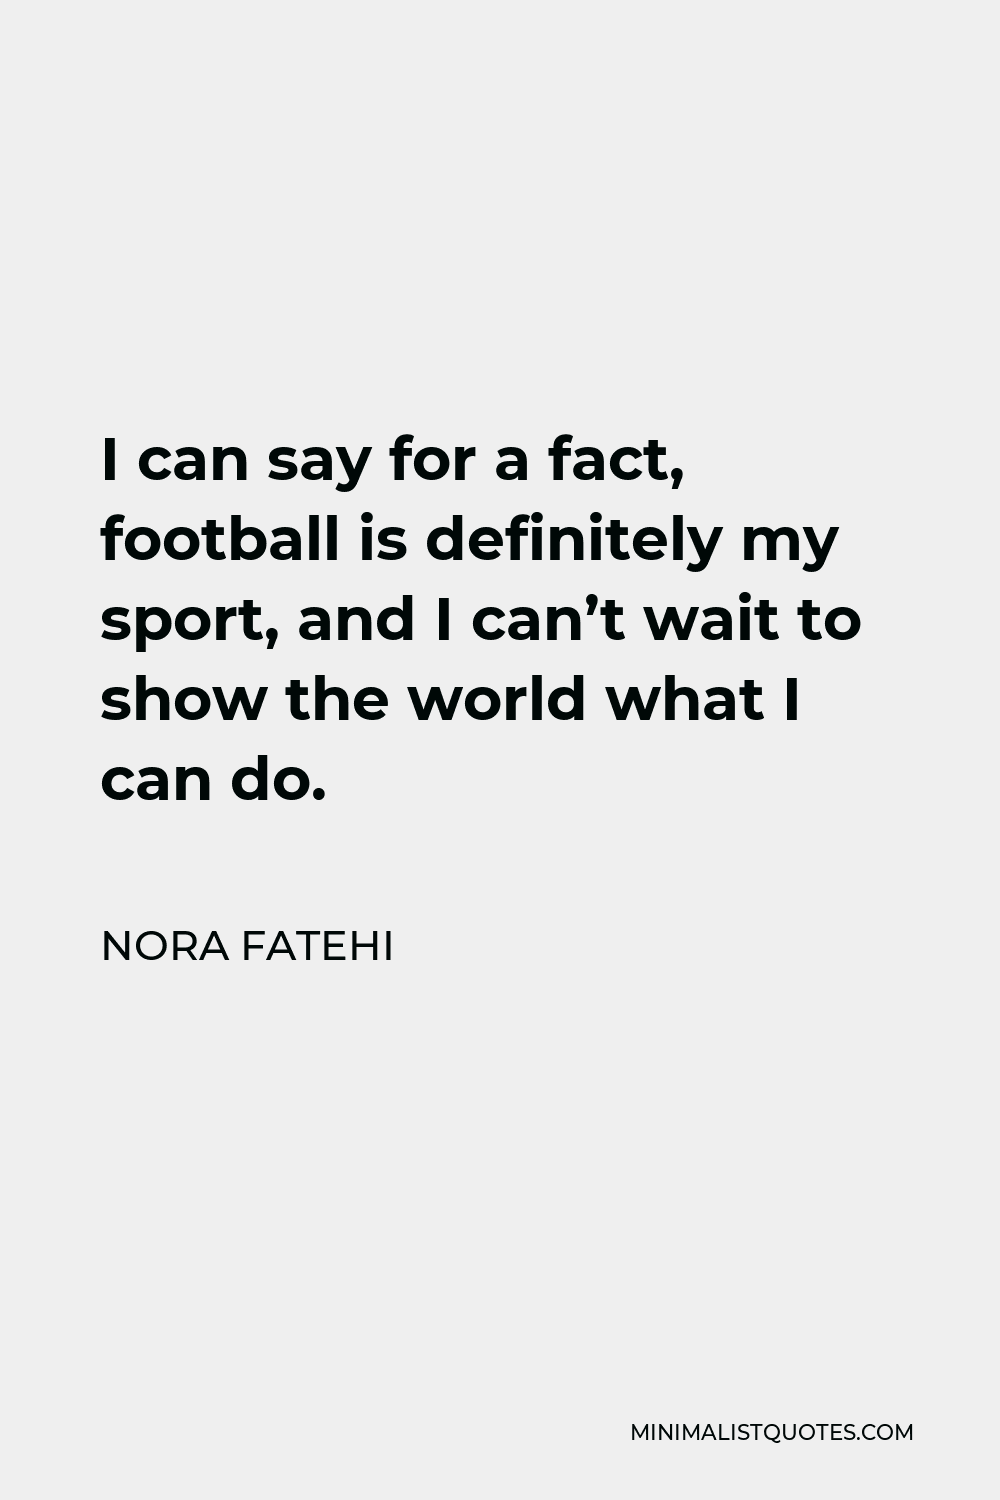 Nora Fatehi Quote - I can say for a fact, football is definitely my sport, and I can’t wait to show the world what I can do.